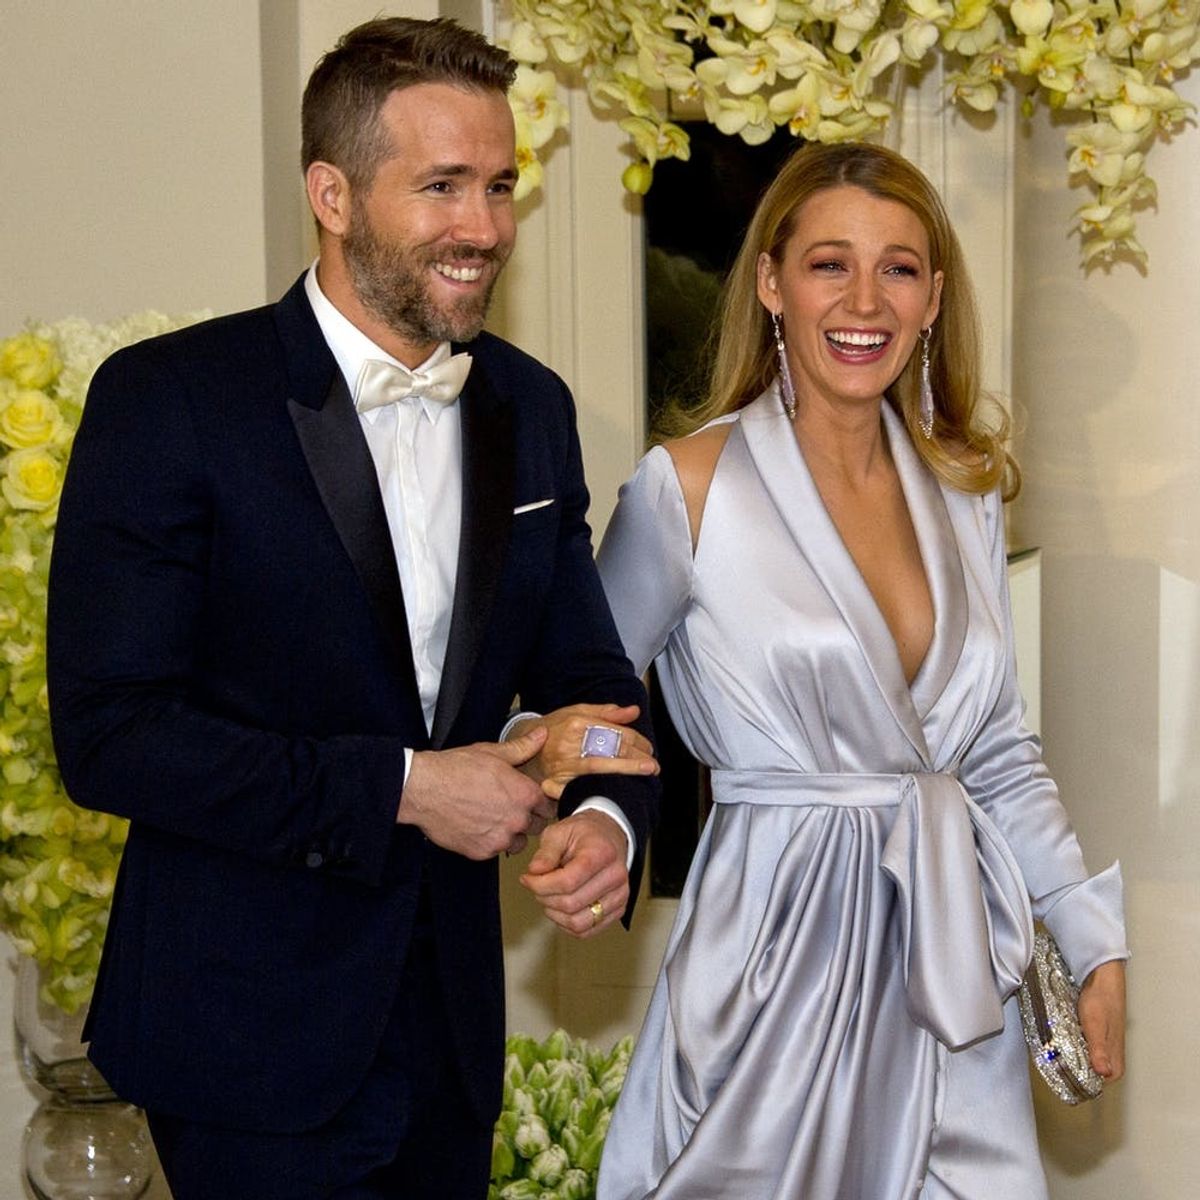 Blake Lively and Ryan Reynolds Share a Cute AF Baby Bump Hug At T-Swift’s Beach Party